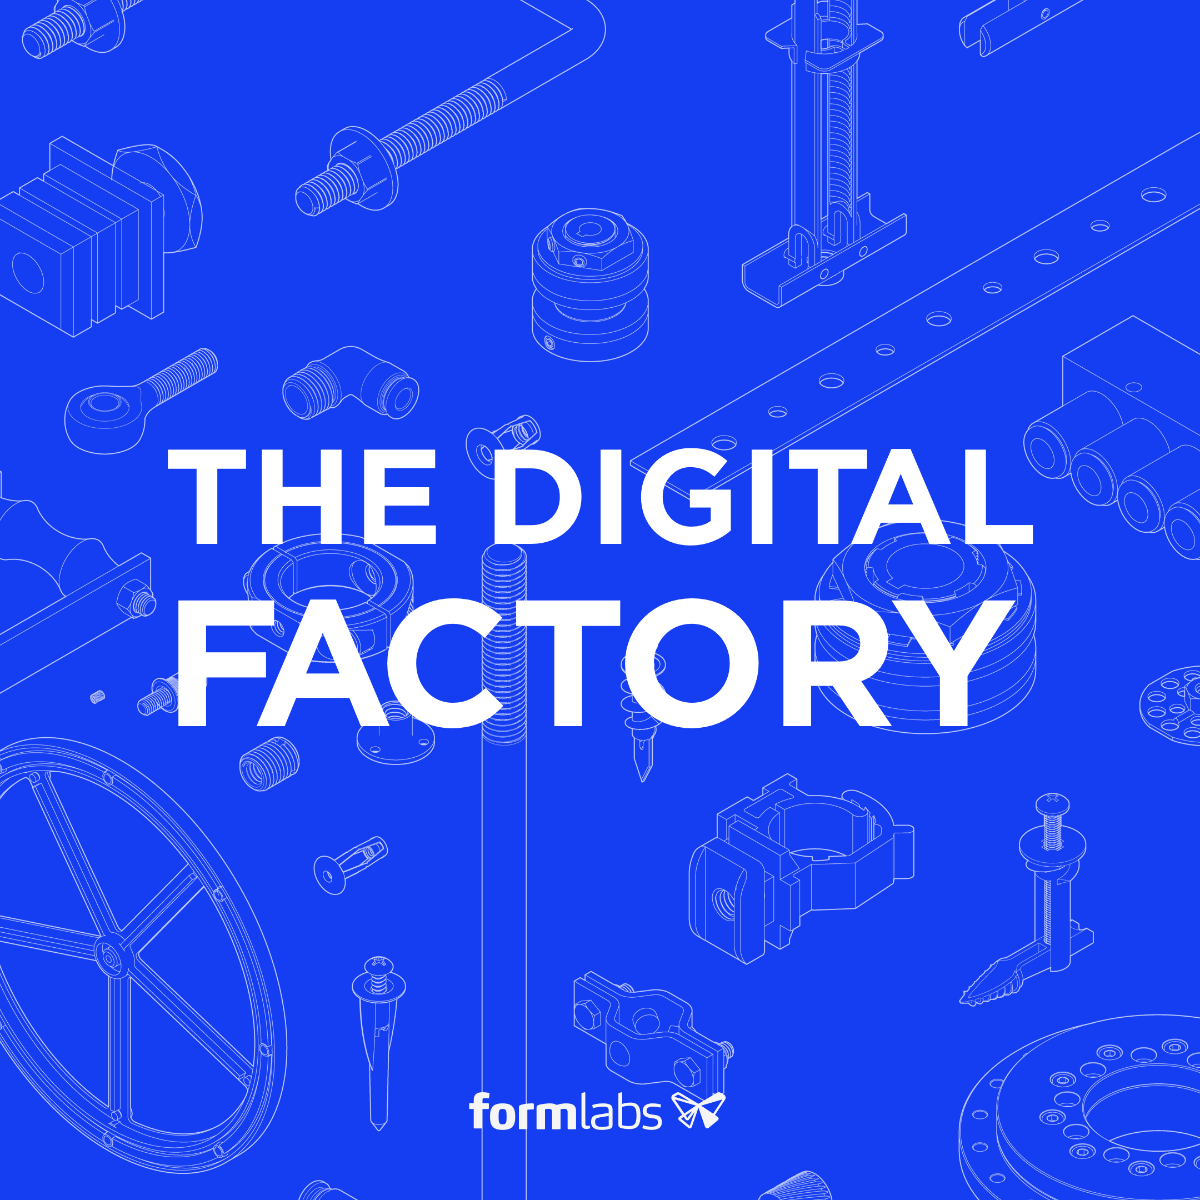 Digital factory revenues to jump to $375 billion in 2030